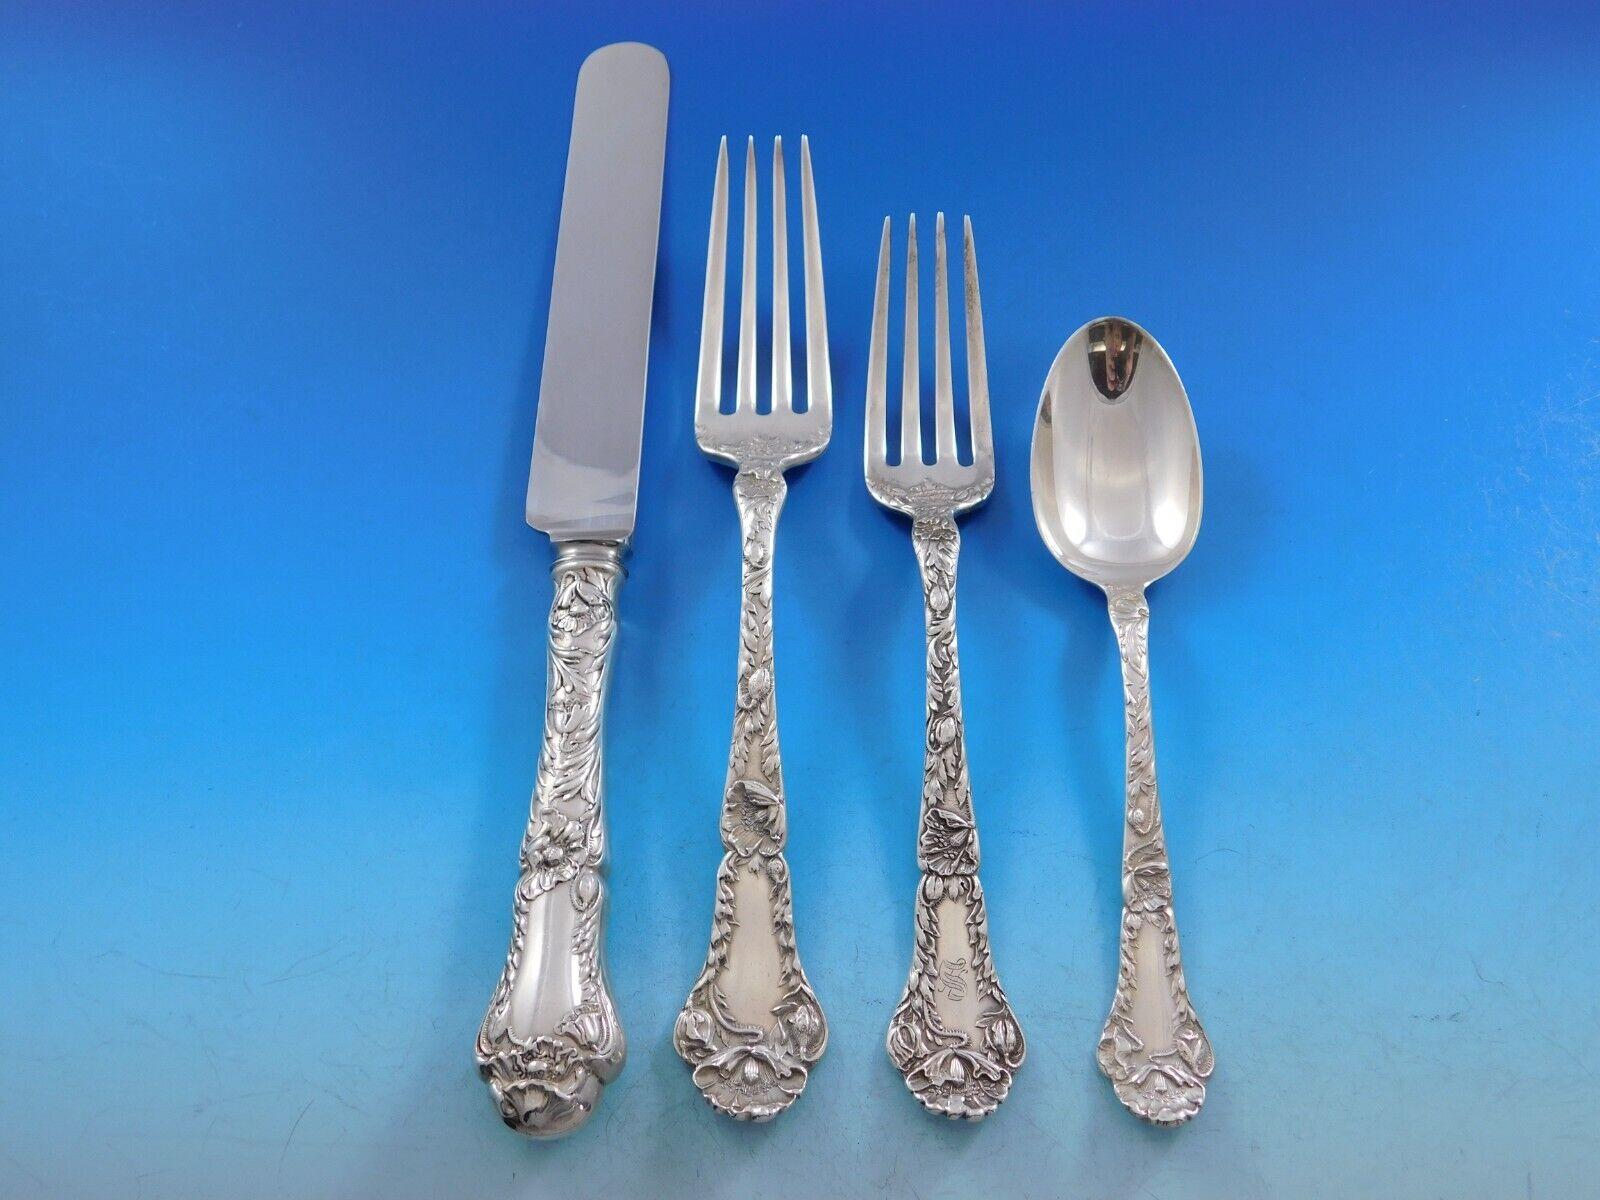 how much is silver flatware worth